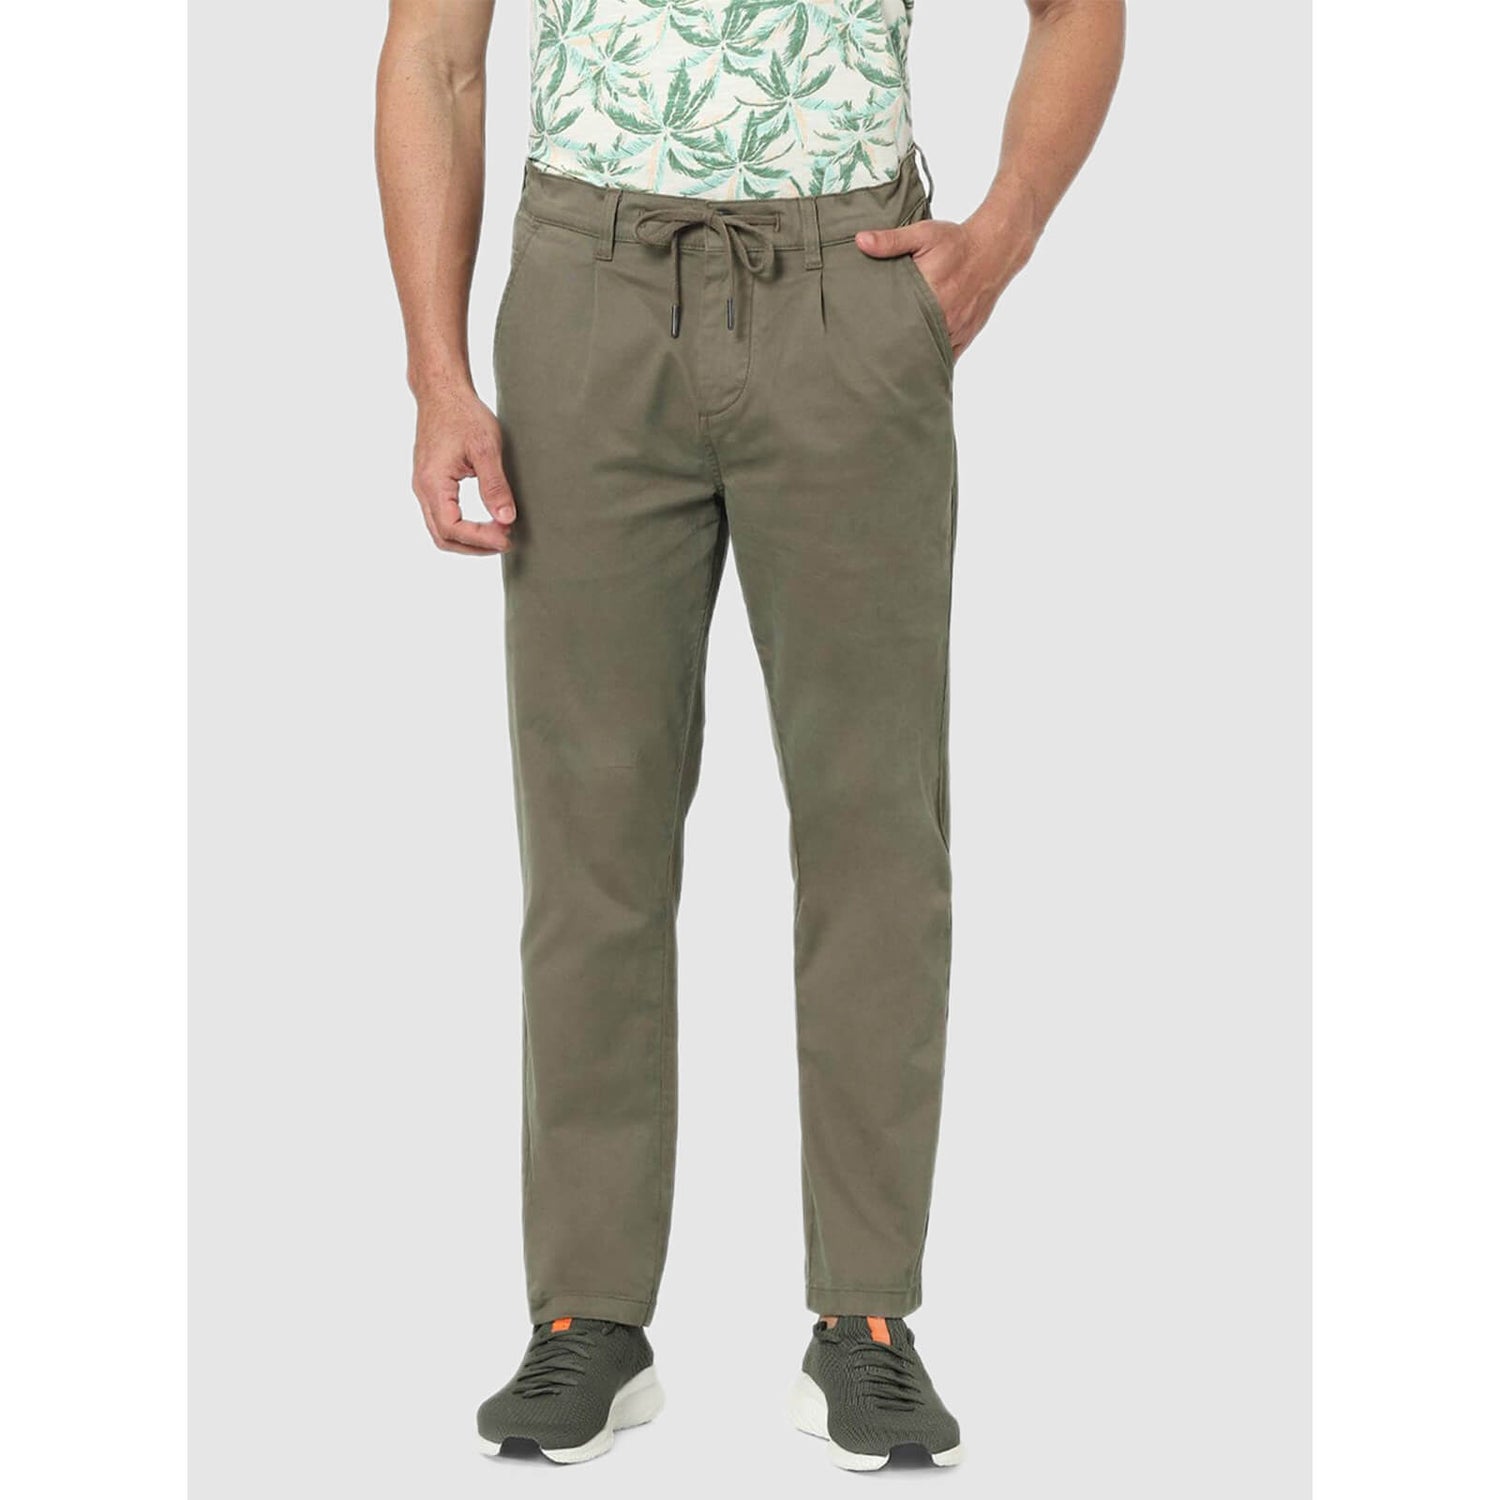 CAVALLO BY LINEN CLUB Regular Fit Men Green Trousers  Buy CAVALLO BY LINEN  CLUB Regular Fit Men Green Trousers Online at Best Prices in India   Flipkartcom